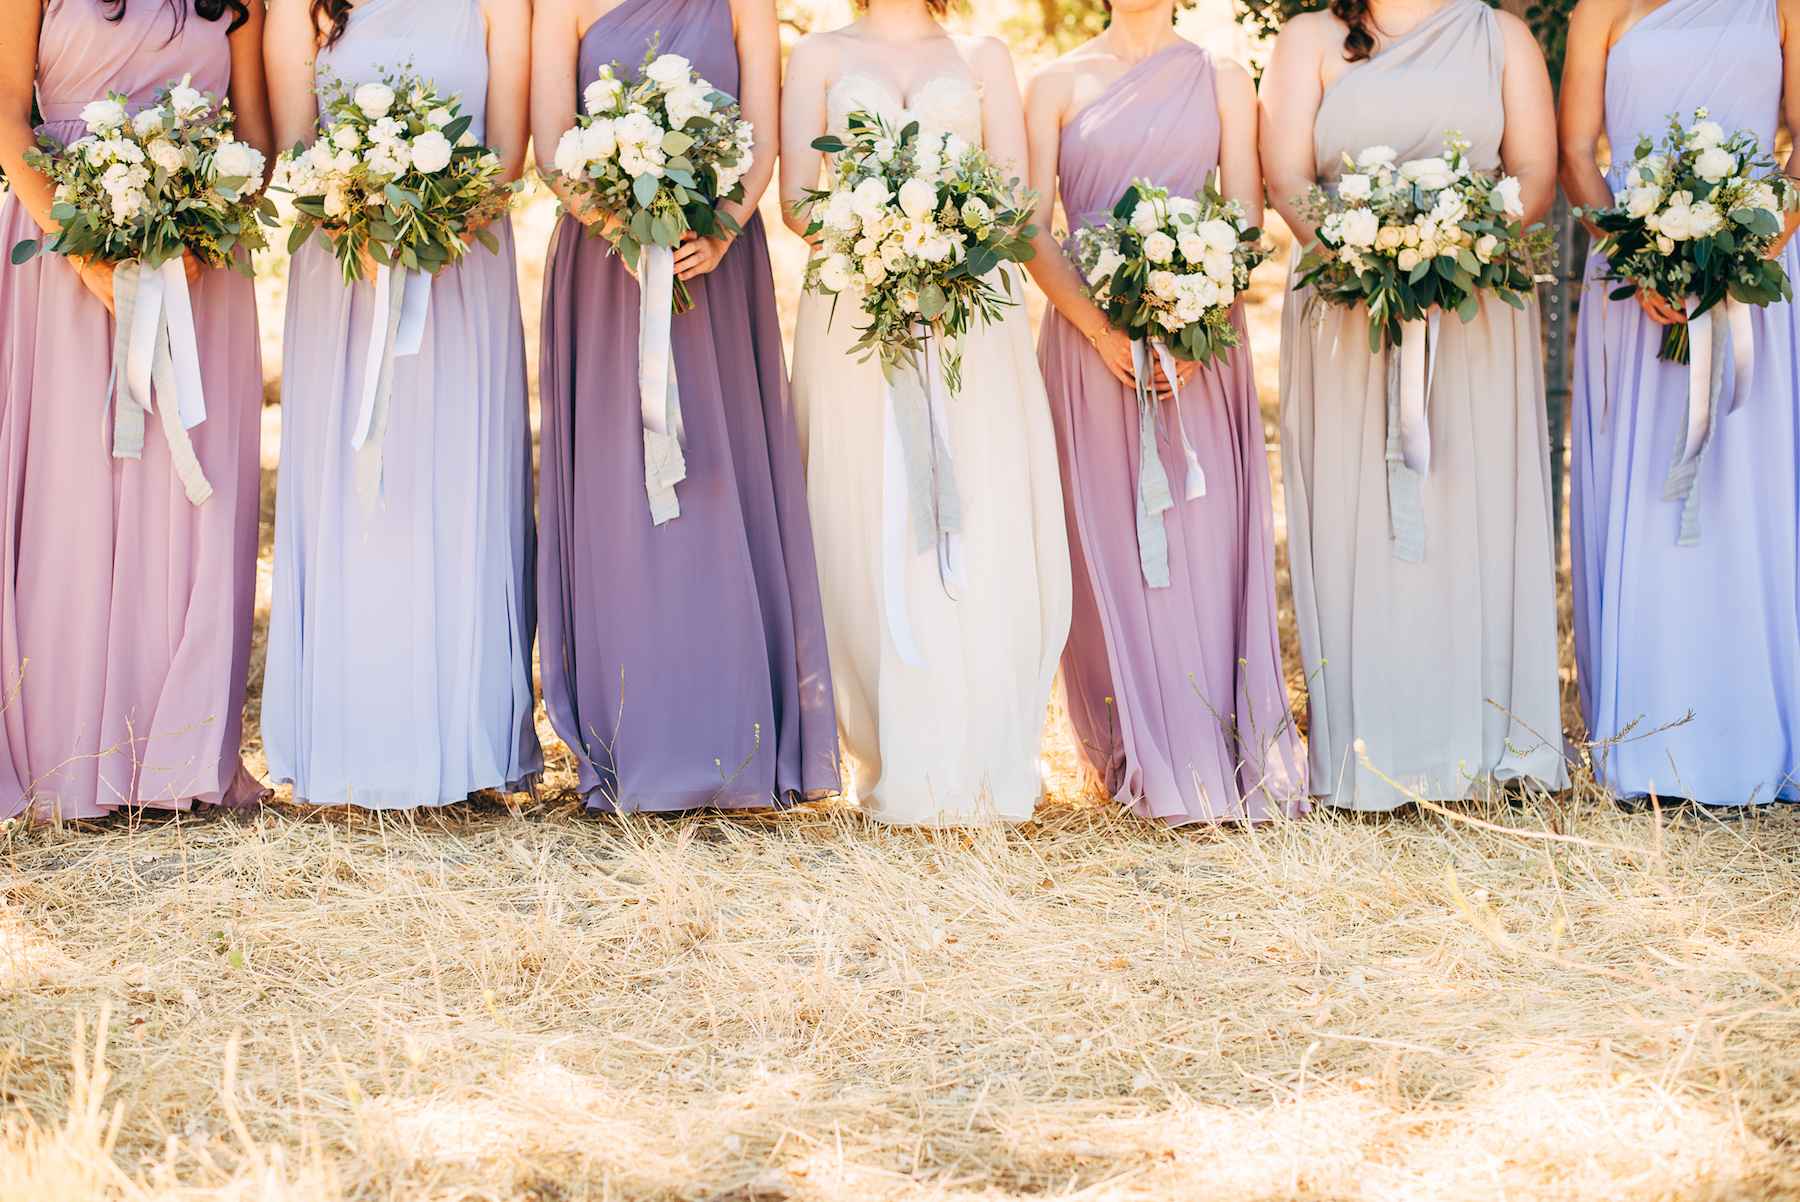 White wedding flowers with lavender bridesmaid dresses